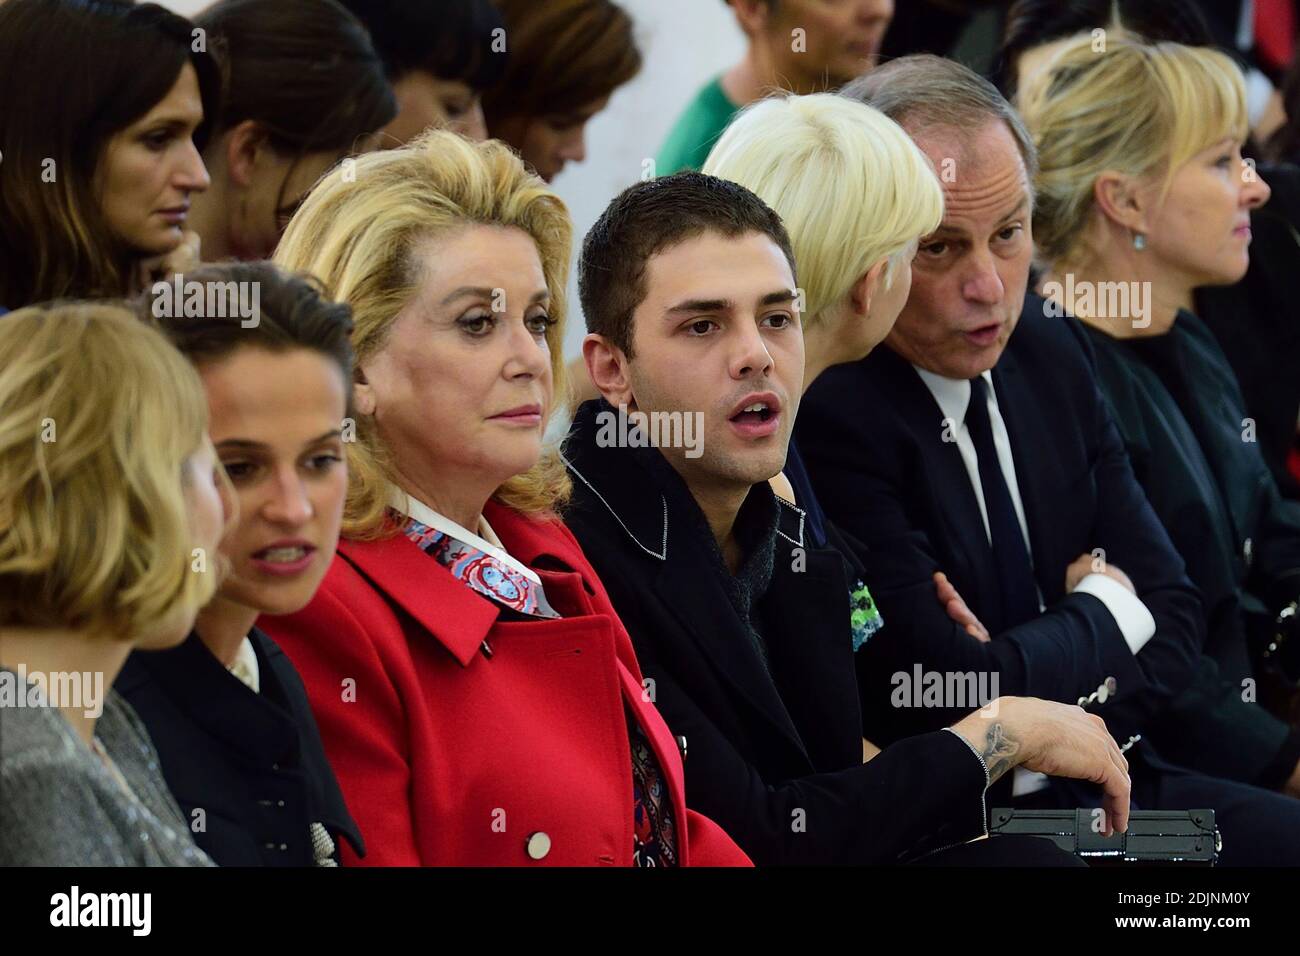 Xavier Dolan and Catherine Deneuve attend the Louis Vuitton show as News  Photo - Getty Images